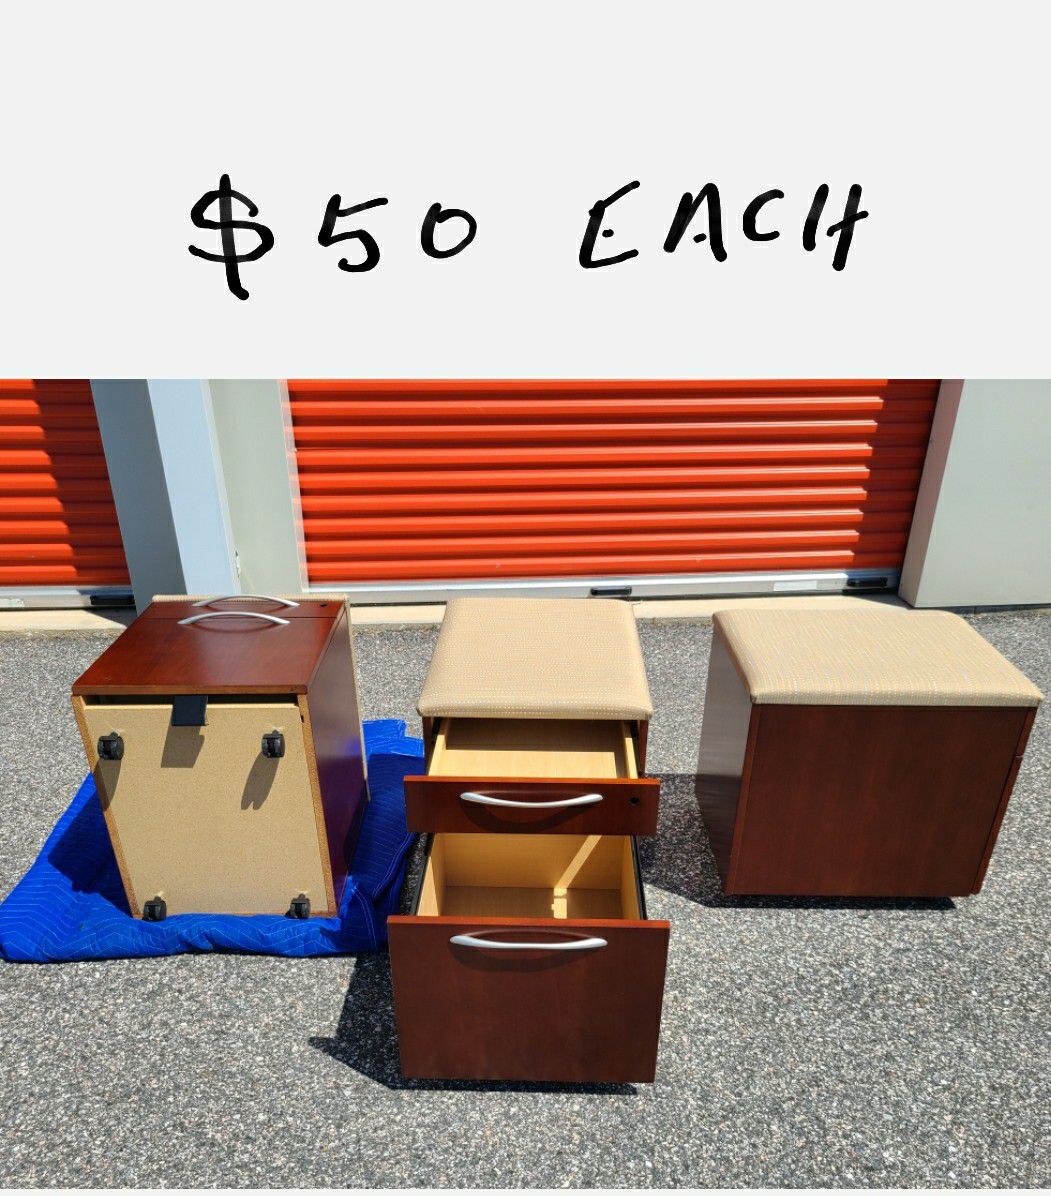 ROLLING FILING CABINETS **** ((( $50 EACH )))*****